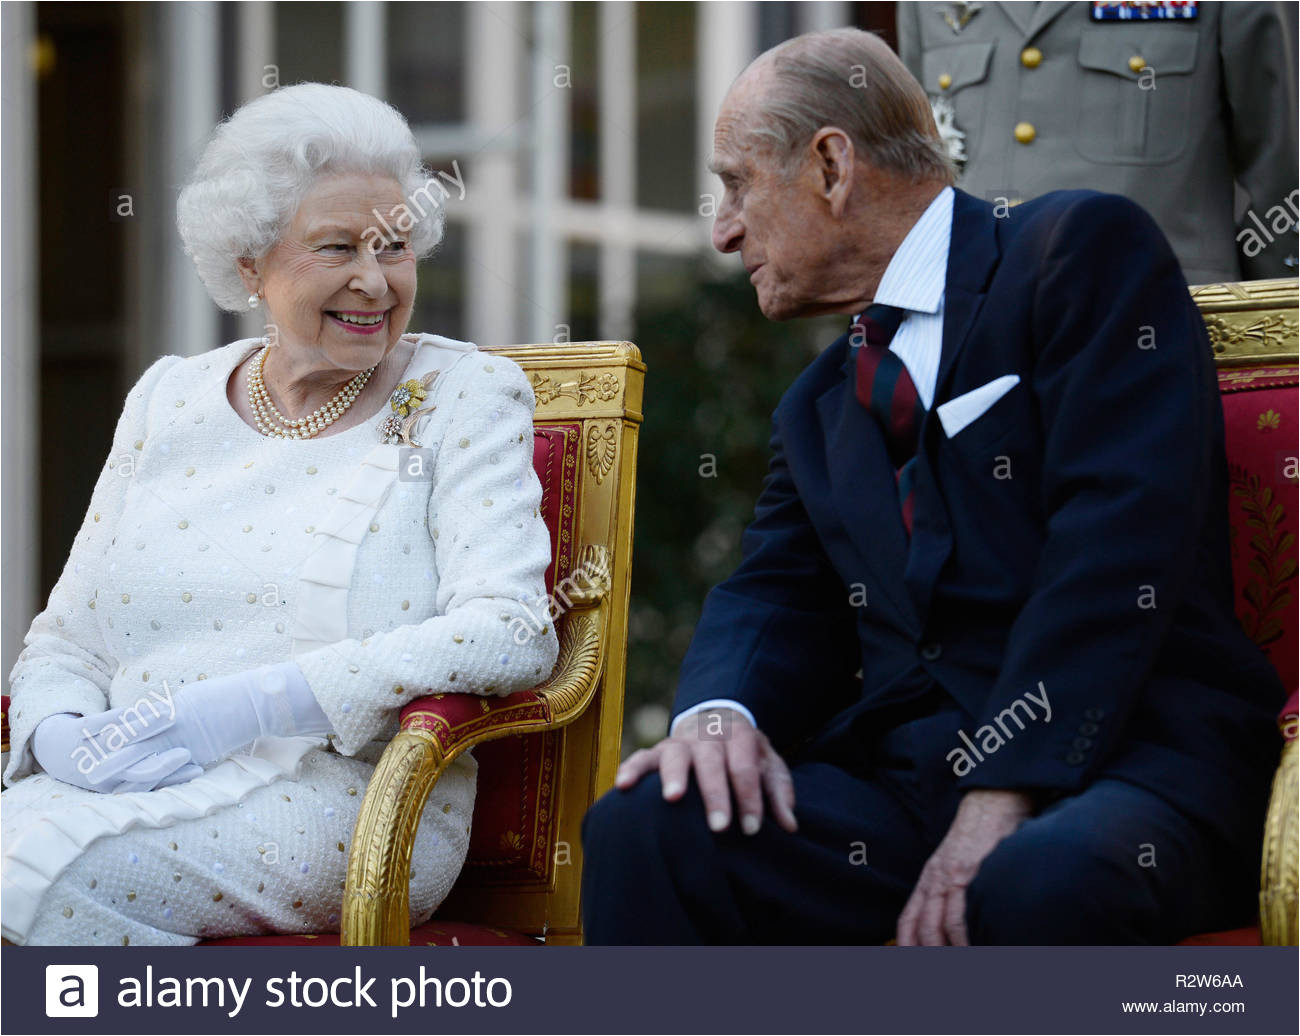 file photo dated 050614 of queen elizabeth ii and the duke of edinburgh the royal couple married on november 20 1947 at westminster abbey and are celebrating a rare achievement their 71st wedding anniversary r2w6aa jpg